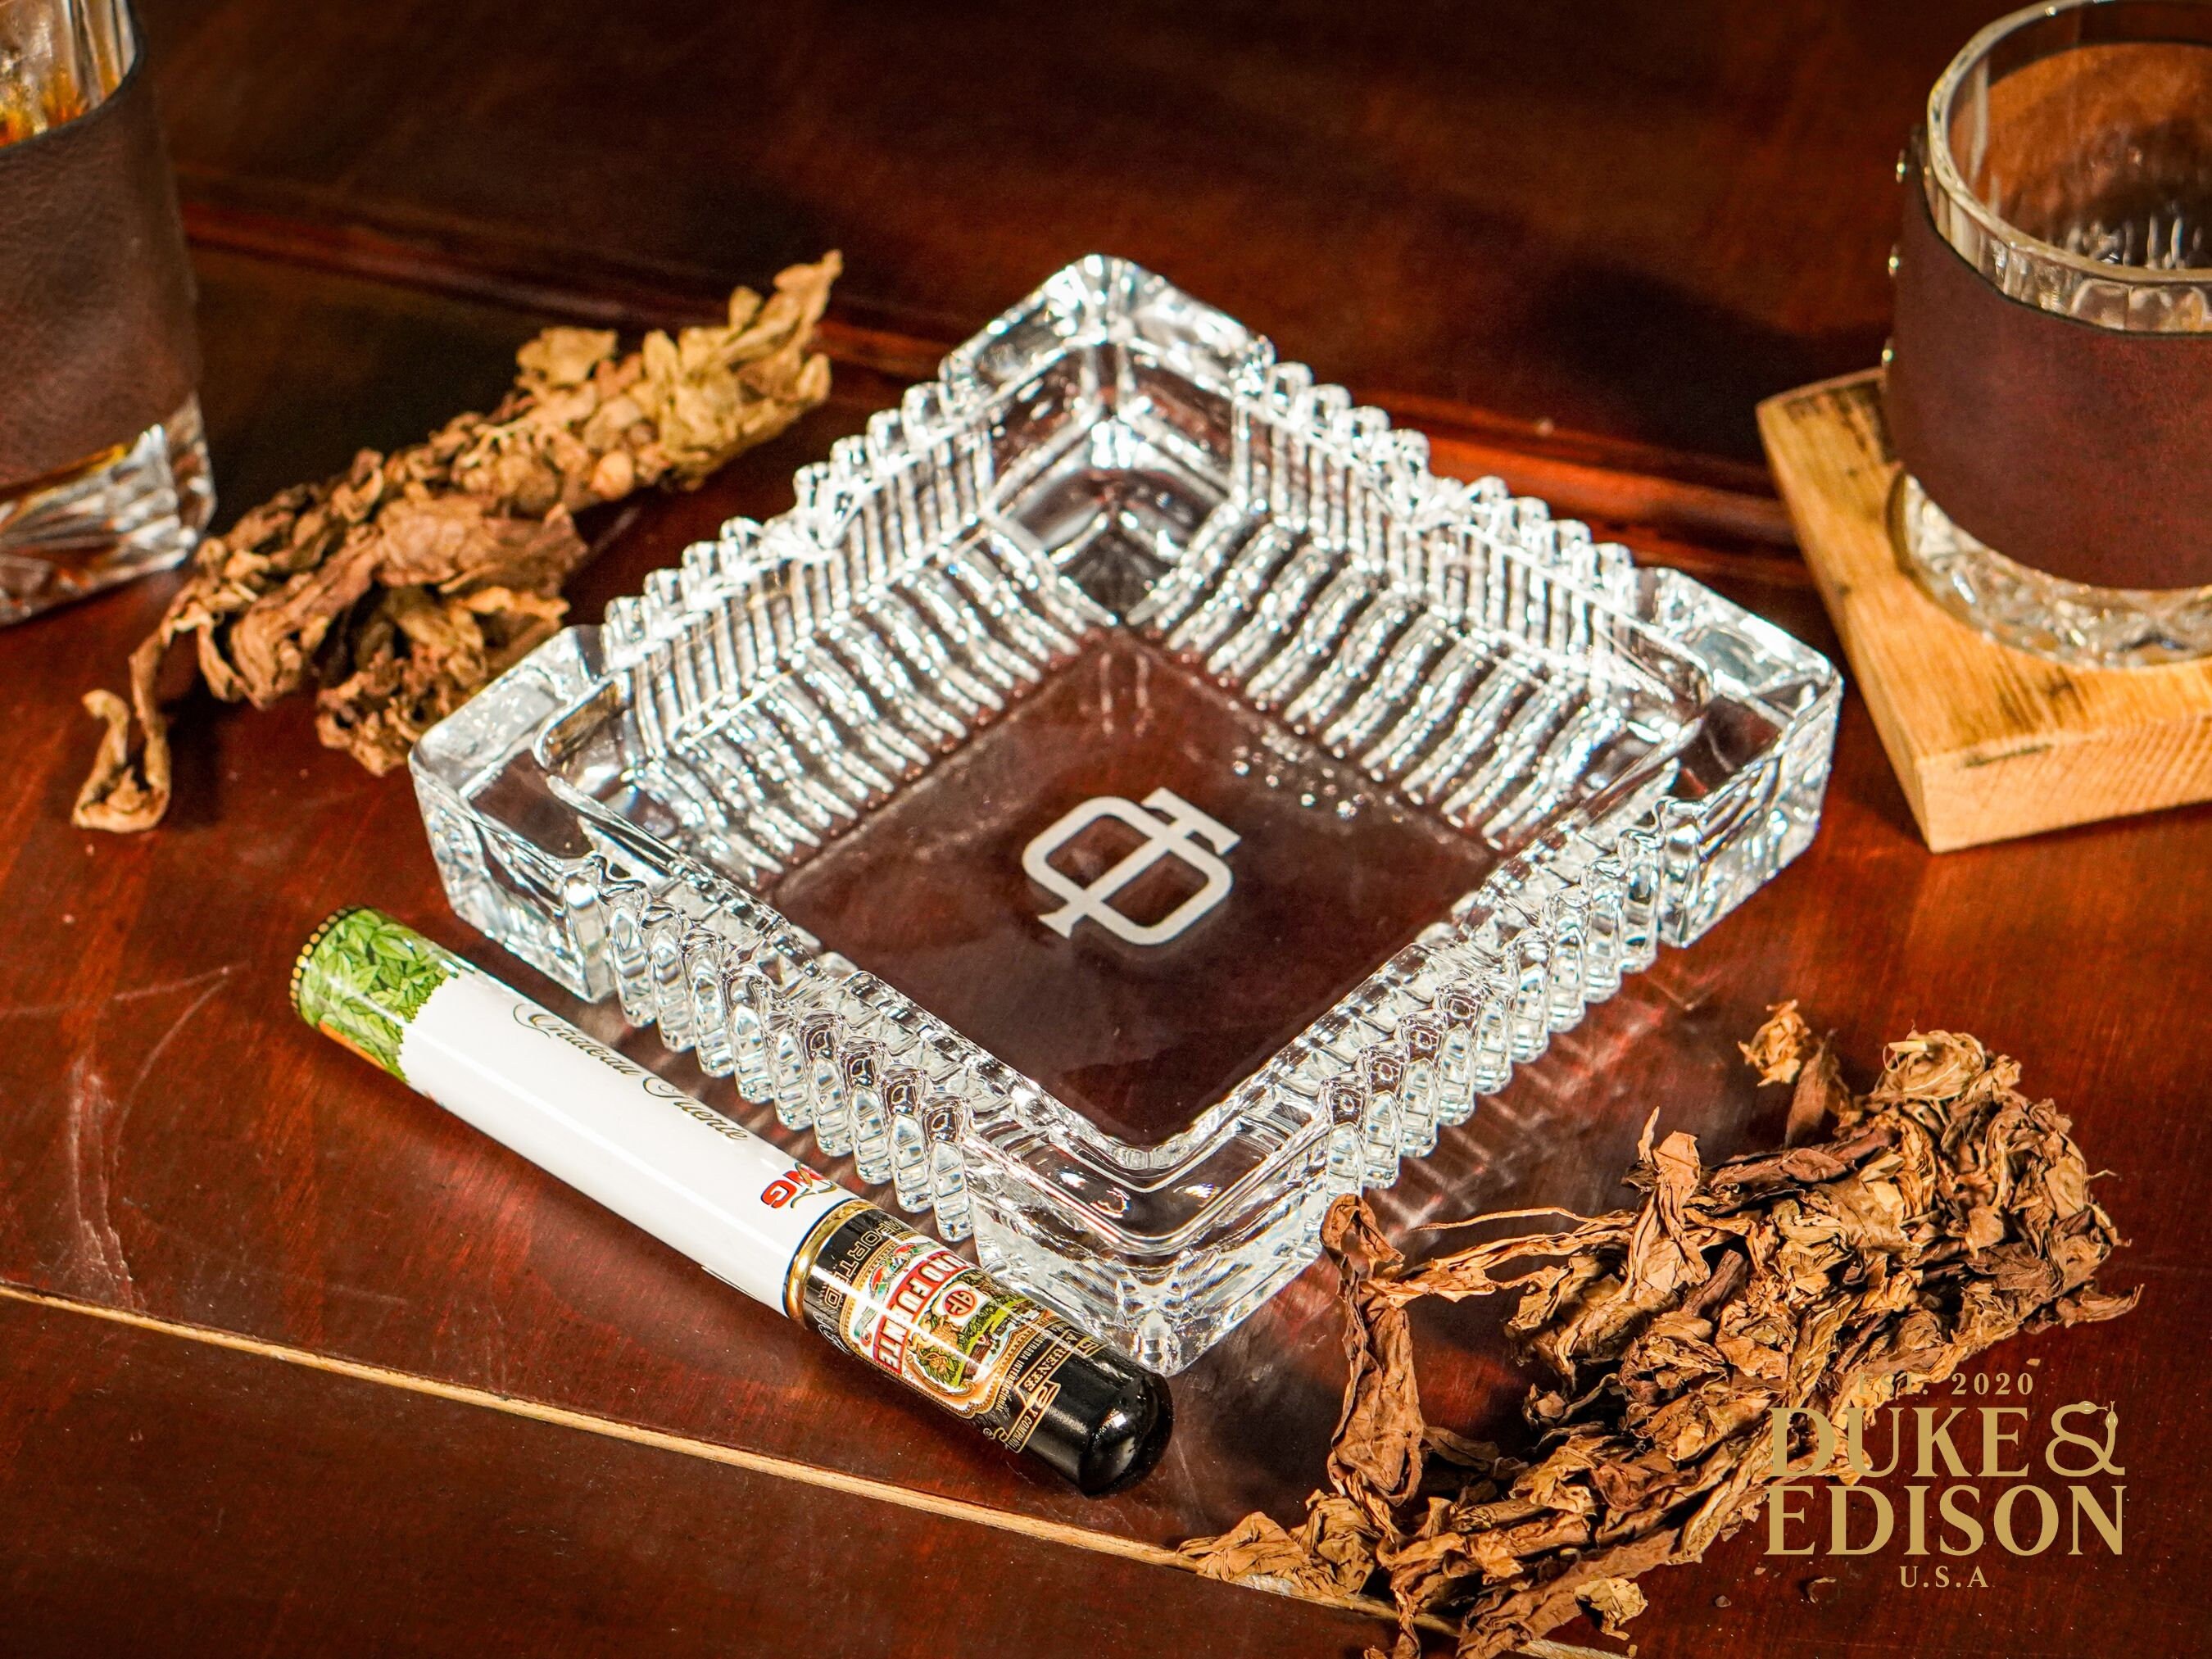 Swanky Ornate Glass Rolling Tray With Built in Ash Tray, Smoking Tobacco  Accessory, Snack Smoking Glass Tray, Tobacco Rolling Tray 